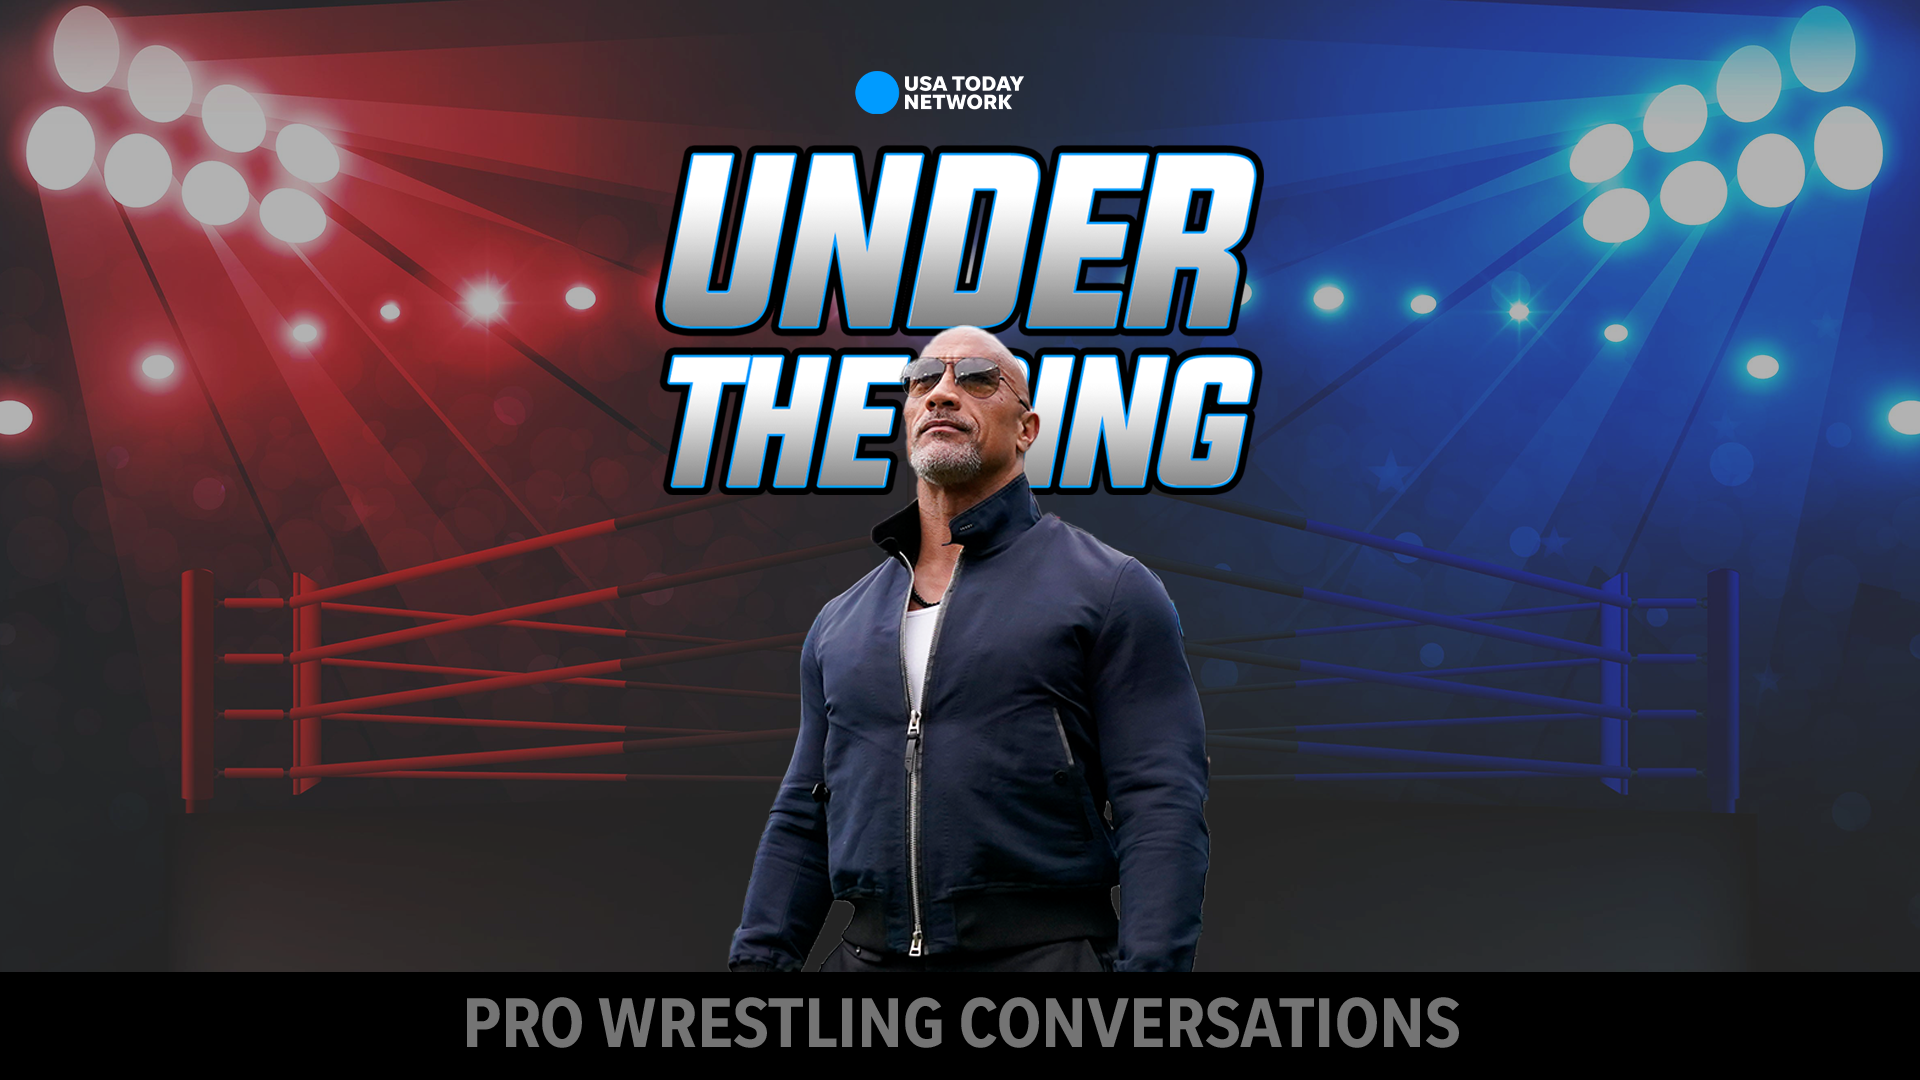 Under The Ring: Special edition on WWE Raw to Netflix, Dwayne "The Rock" Johnson to the WWE Board of Directors